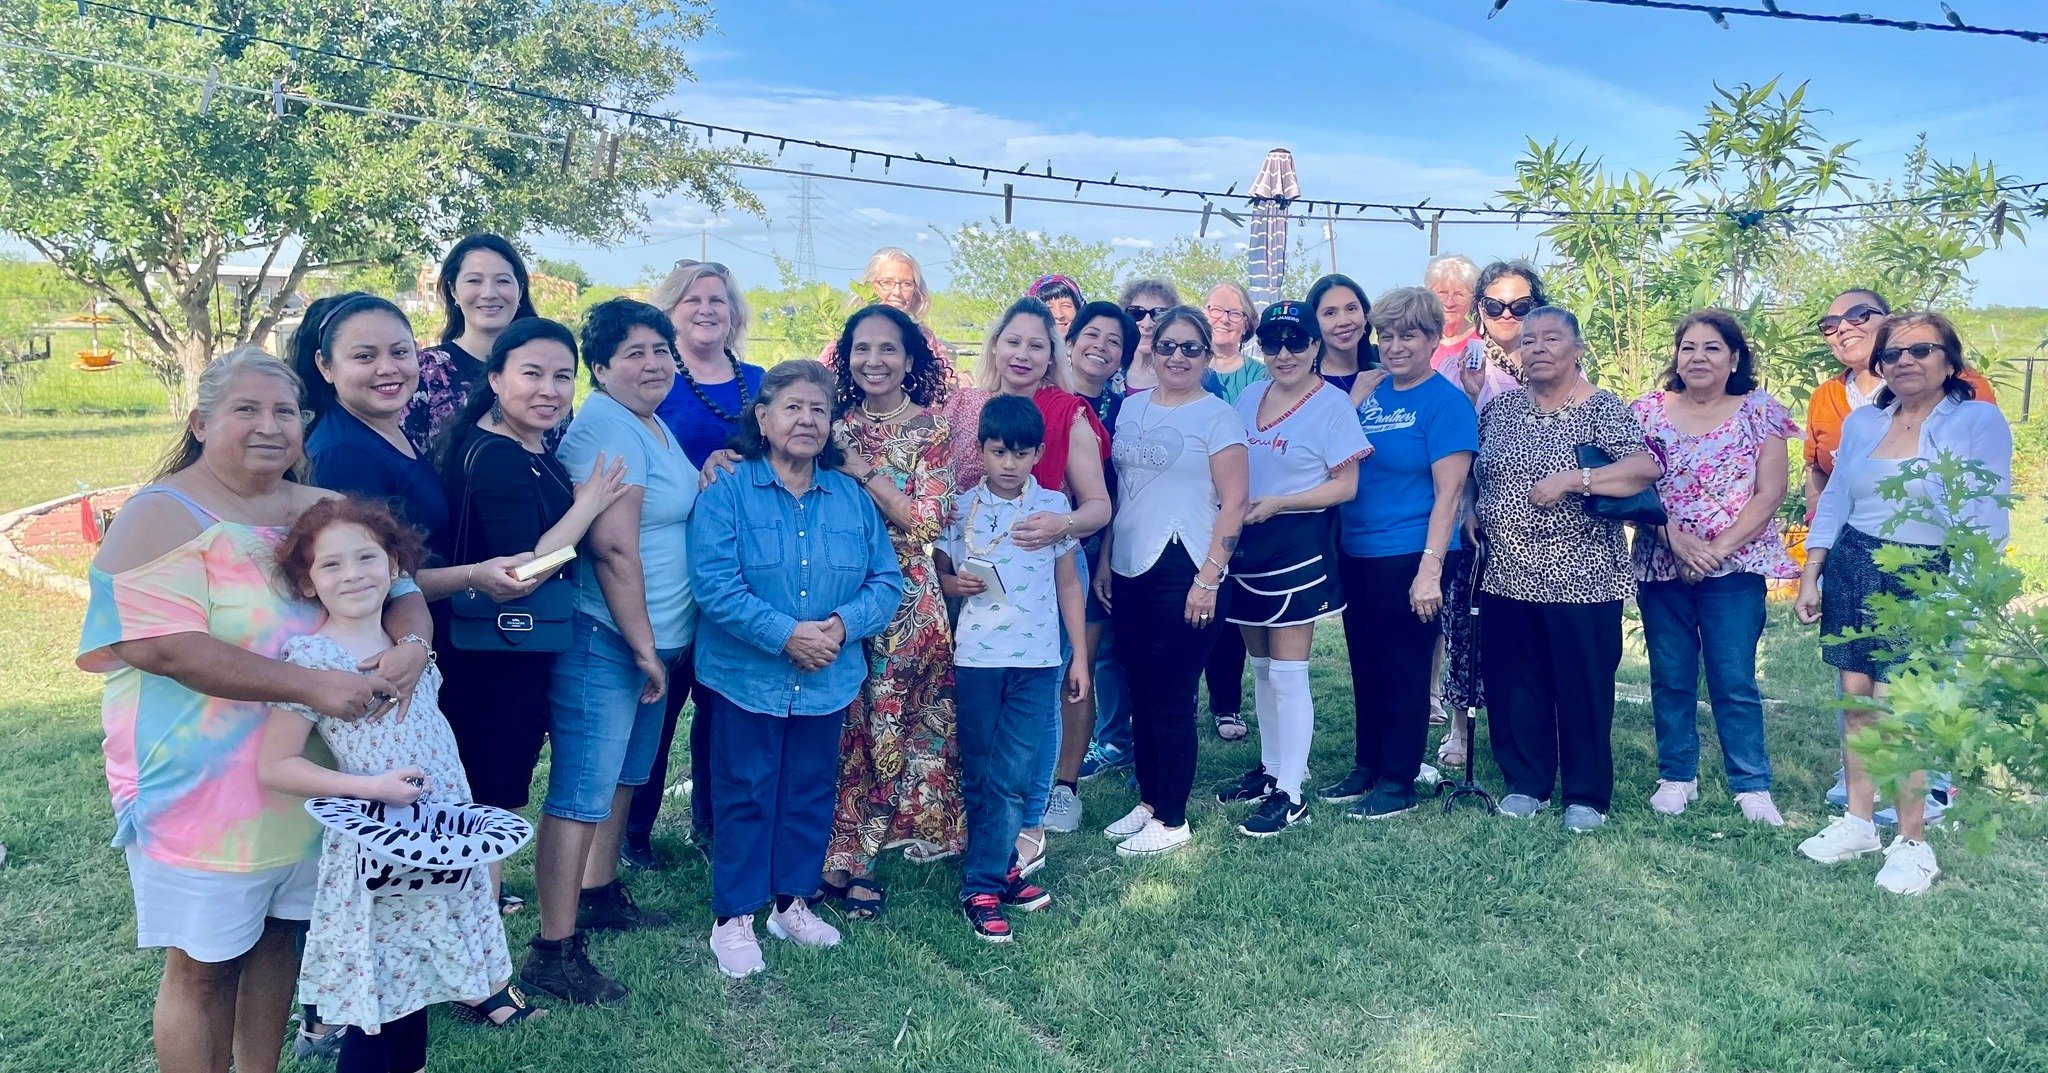 Our April Women's Event was an Accessory Swap at the Luna Ranch.  We really enjoyed the fellowship and potluck luncheon served in the outdoor kitchen.  We praise God for a beautiful day and for beautiful Sisters in Christ.  Pastor Alejandra encourage